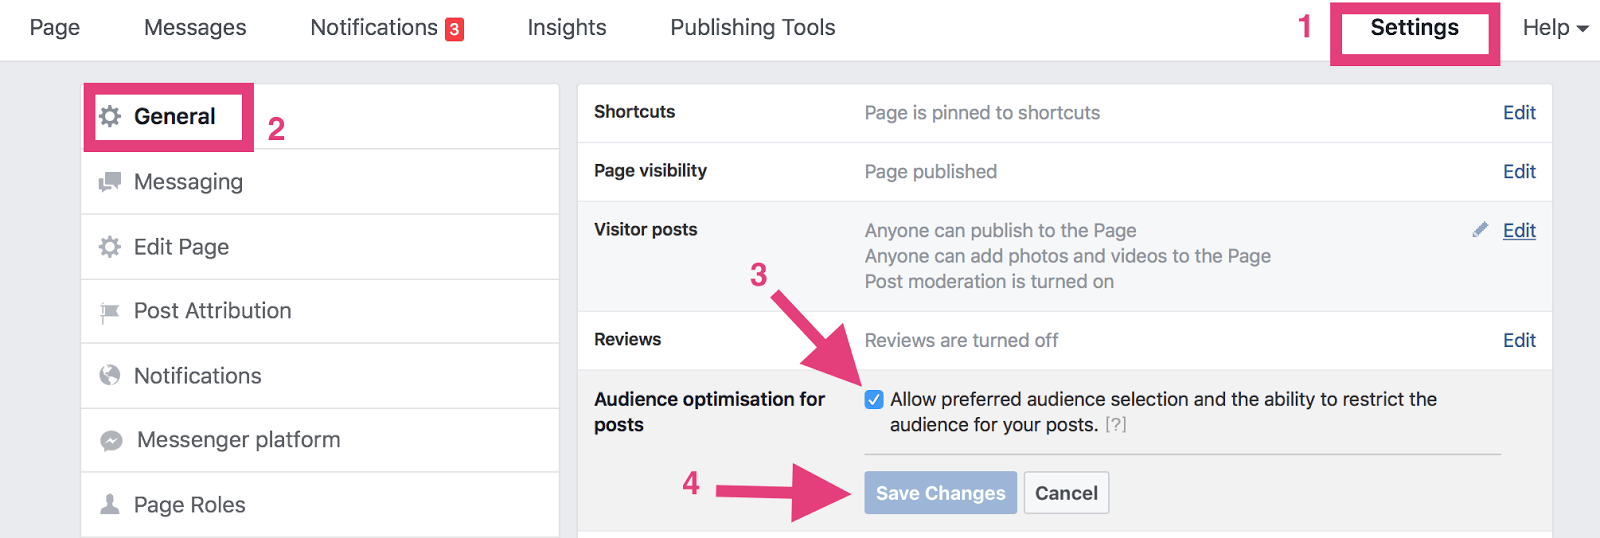 A diagram showing how to enable targeting features on Facebook pages.